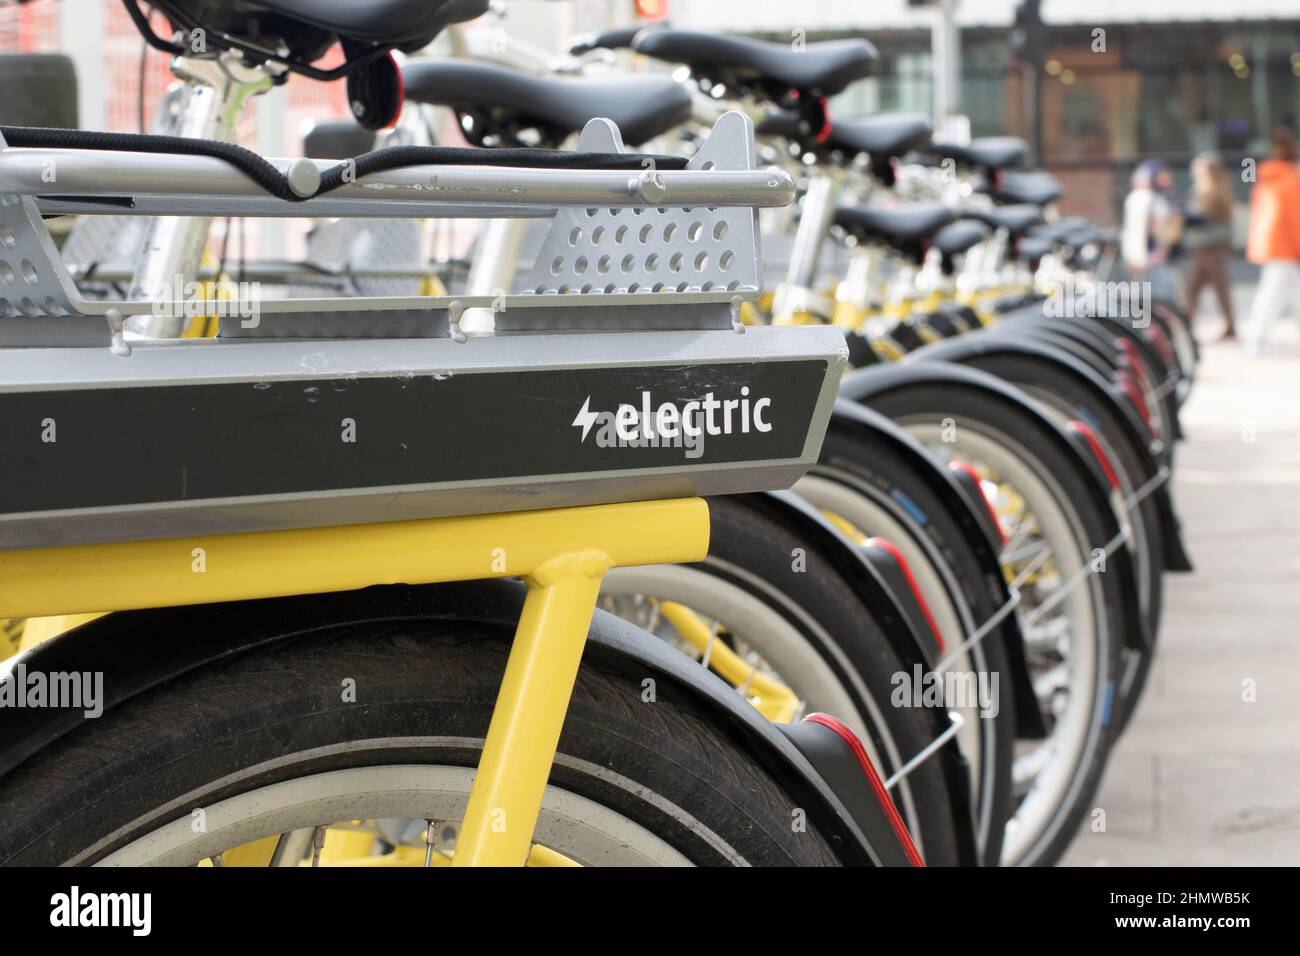 Electric bike from Manchester Bee Network self service cycle hire, Beryl from Transport for Greater Manchester TFGM Stock Photo